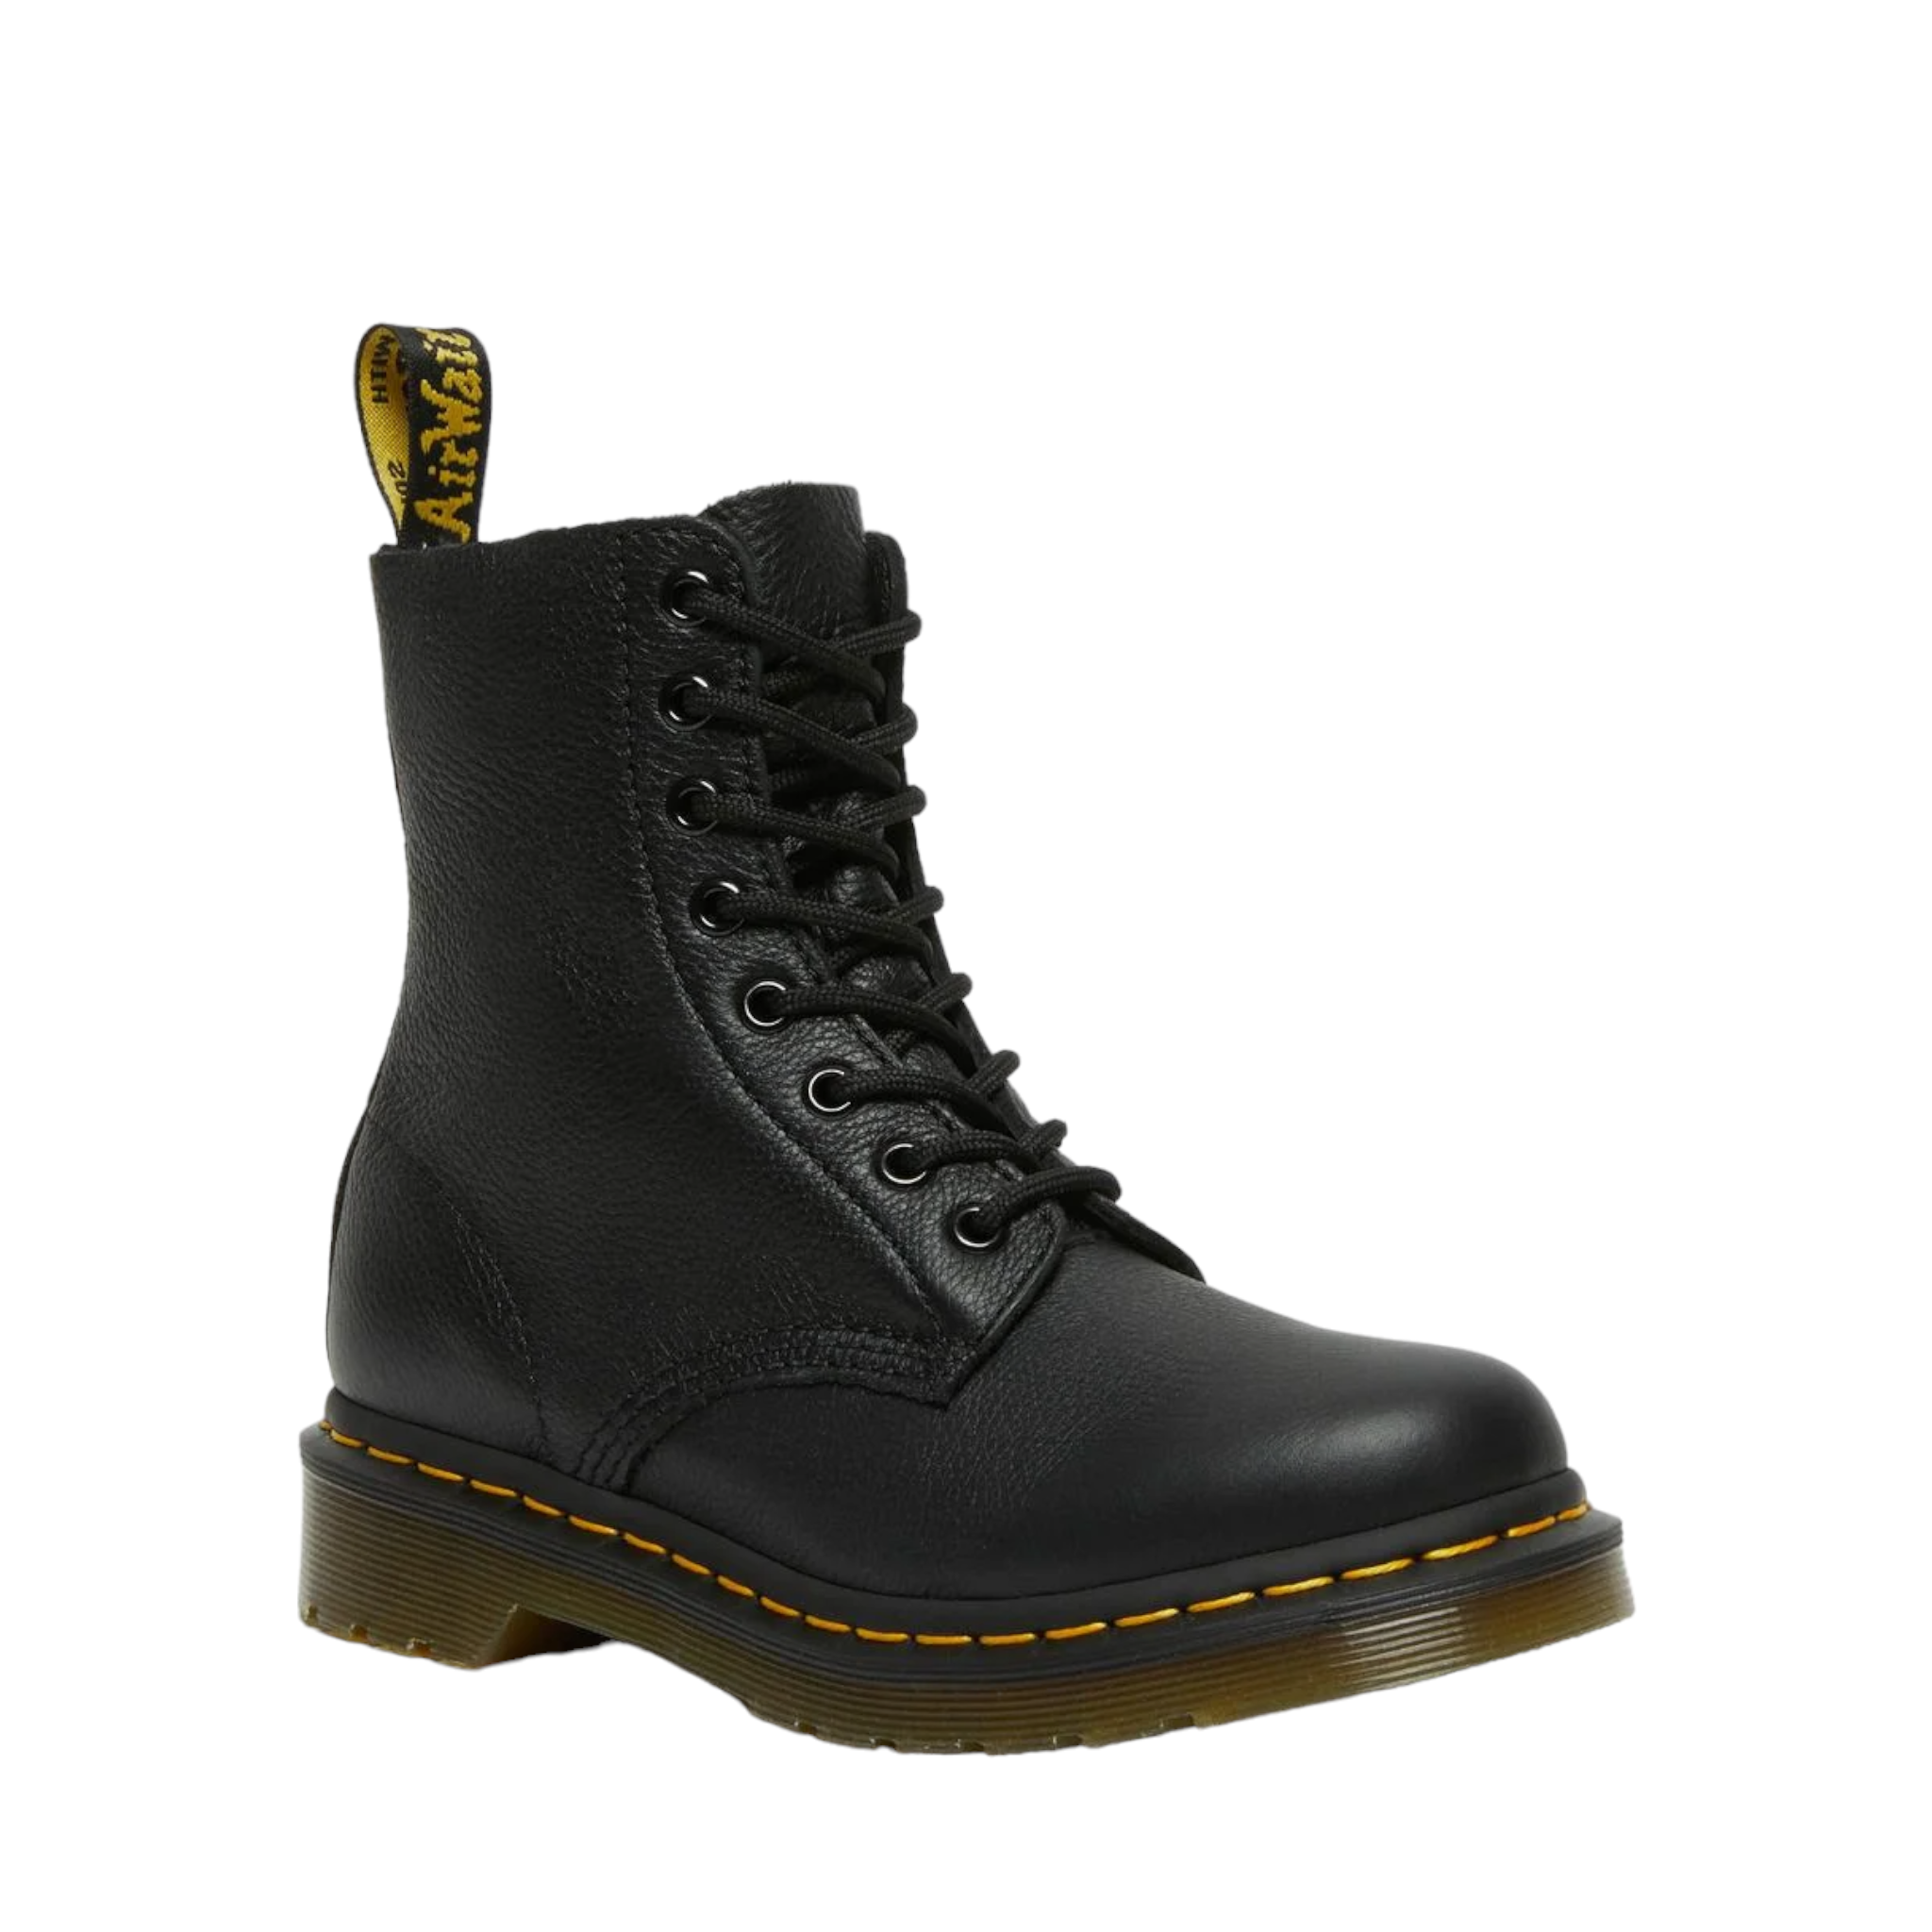 Shop Pascal 8 Eye Dr Martens - with shoe&me - from Dr. Martens - Boots - Boot, Summer, Winter, Womens - [collection]